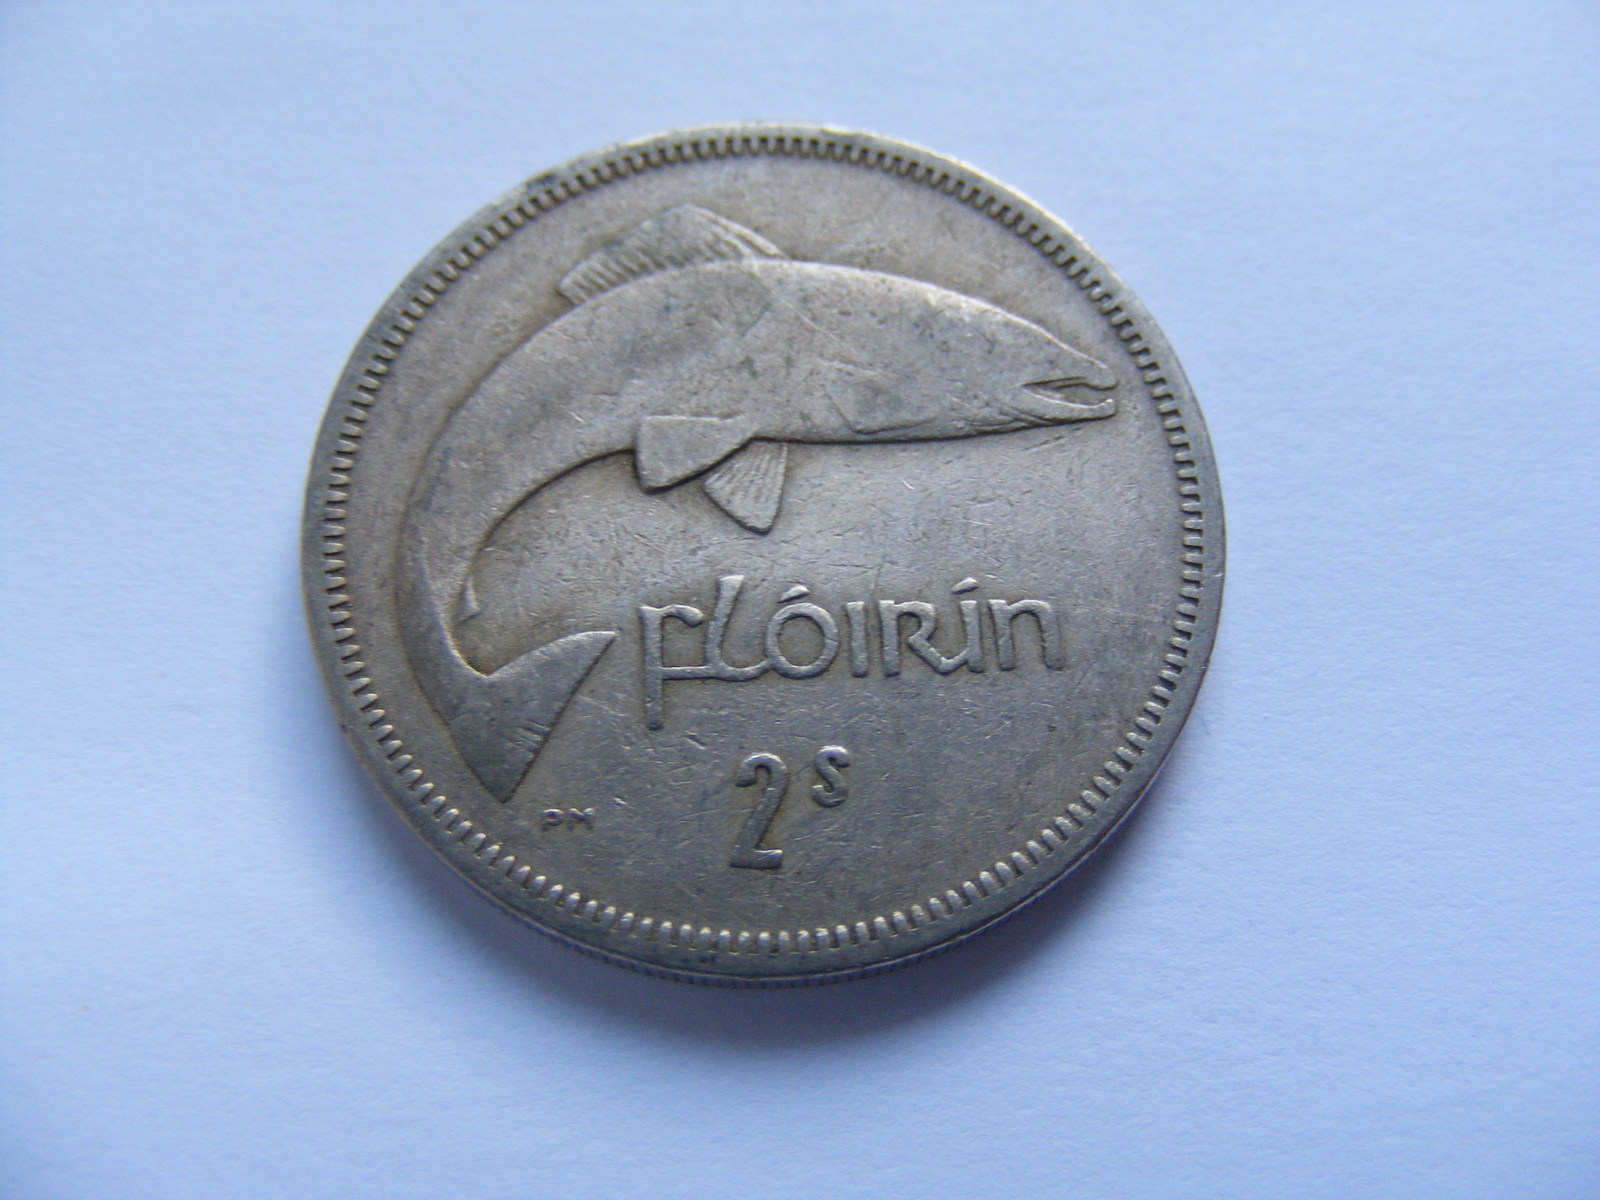 Primary image for 1959 Irish Two Shilling Florin Coin Old Ireland 2s